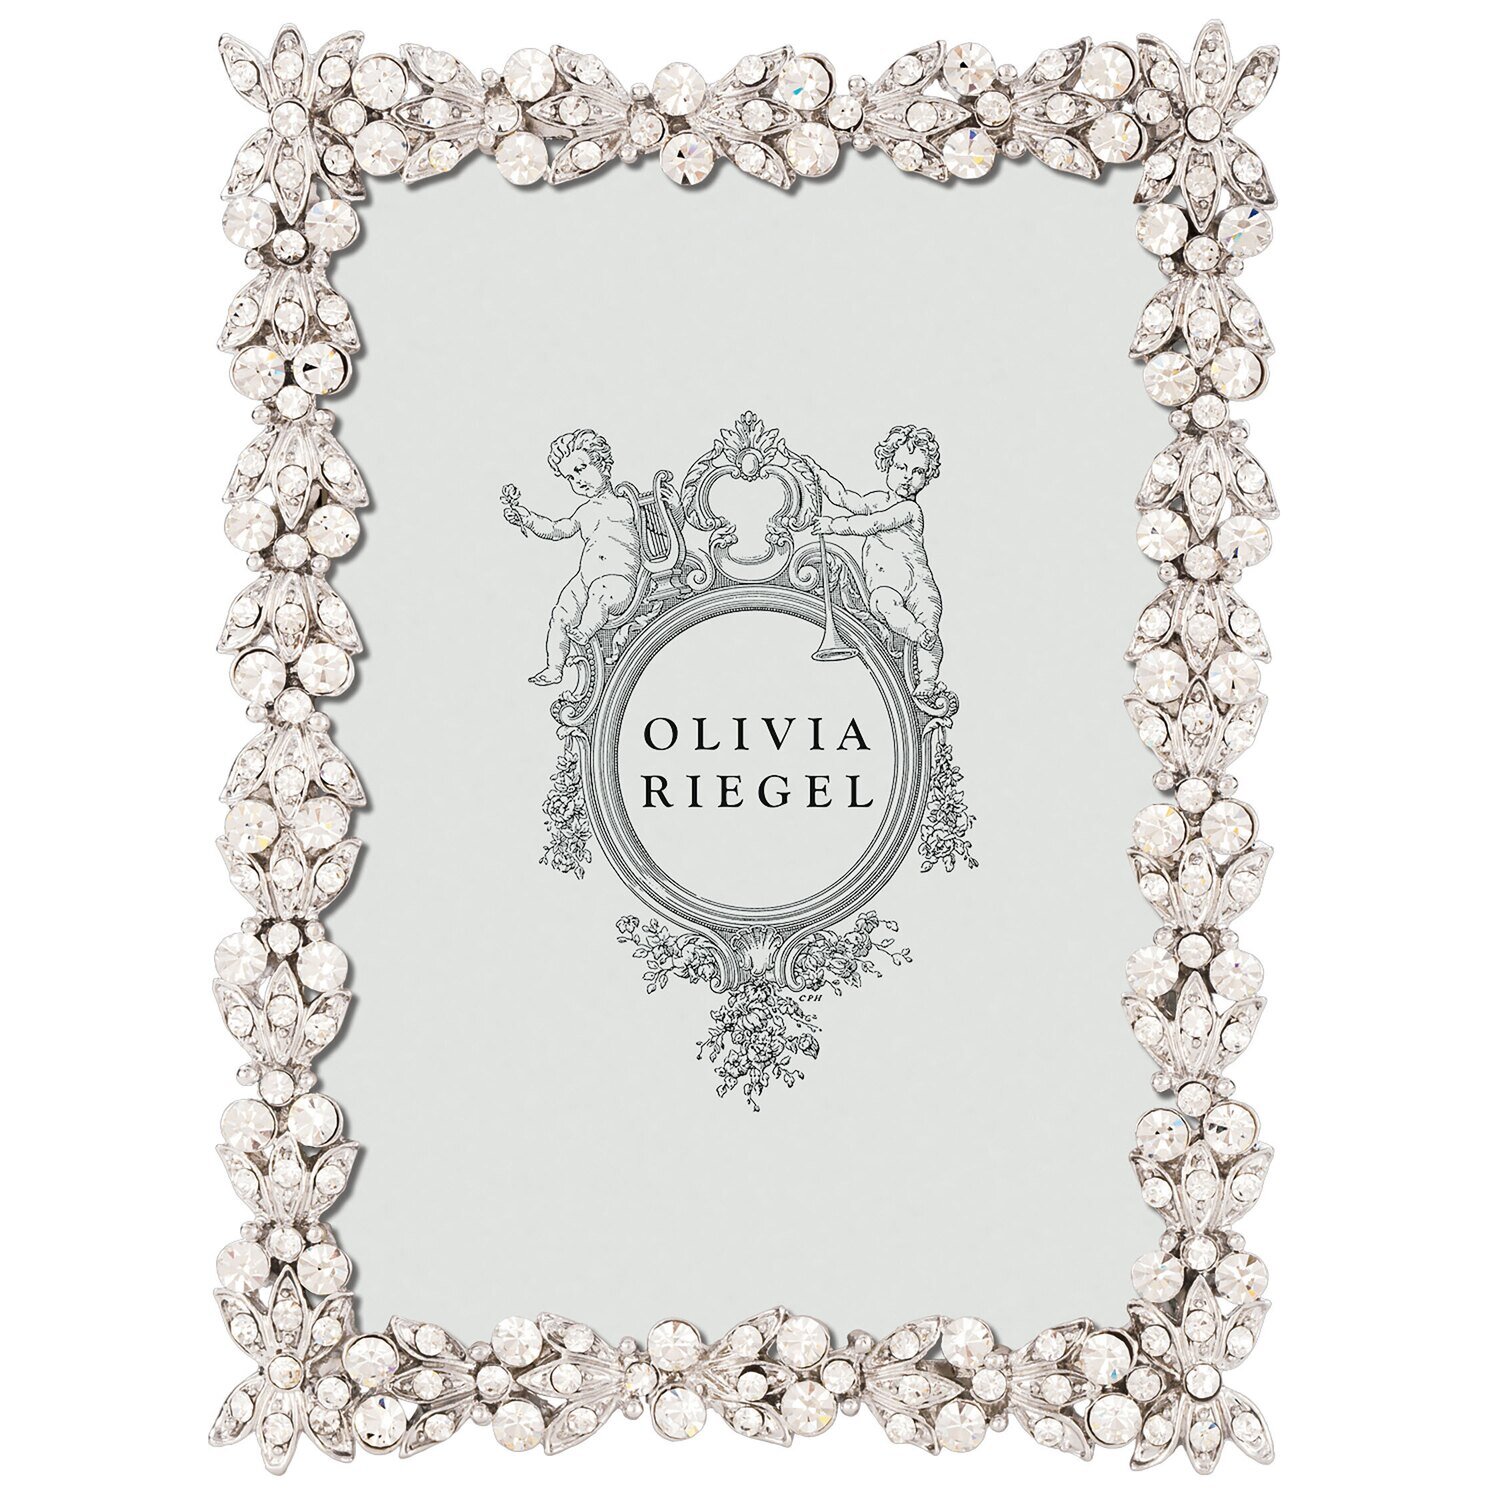 Olivia Riegel Silver Victoria 2.5 x 3.5 Inch Picture Frame RT1983